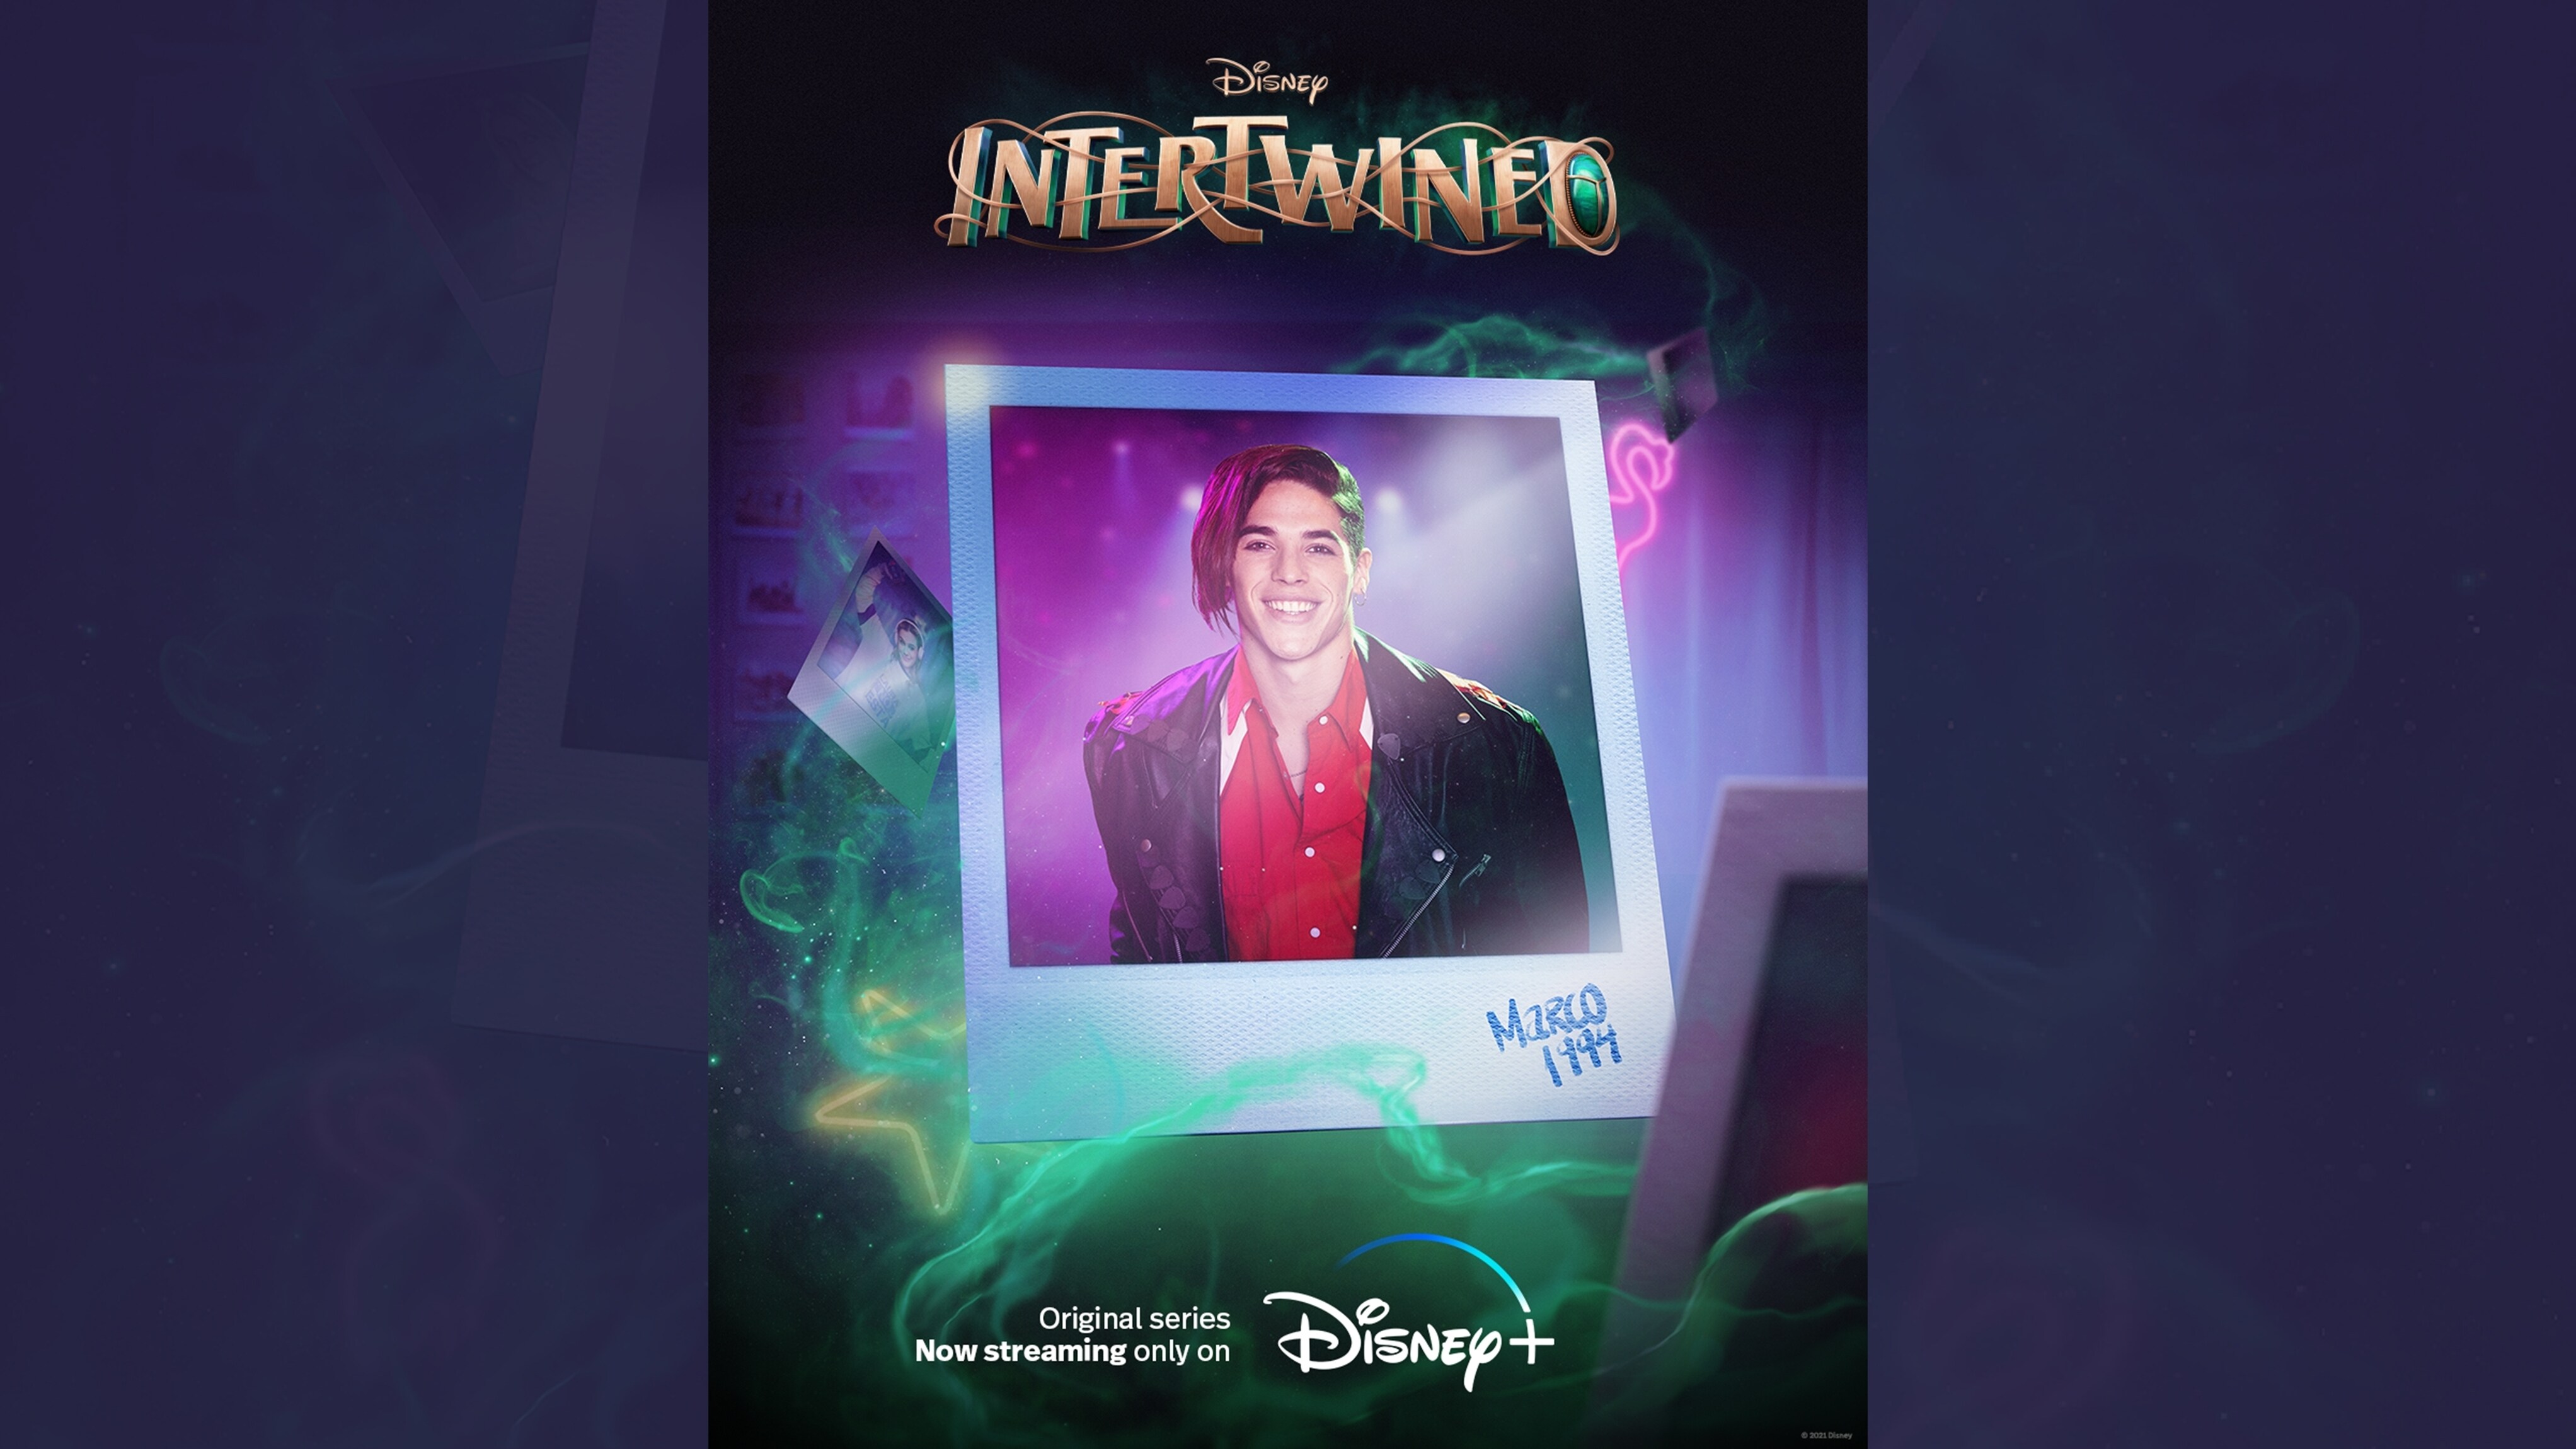 Disney | Intertwined | Marco (1994) | Original series now streaming only on Disney+